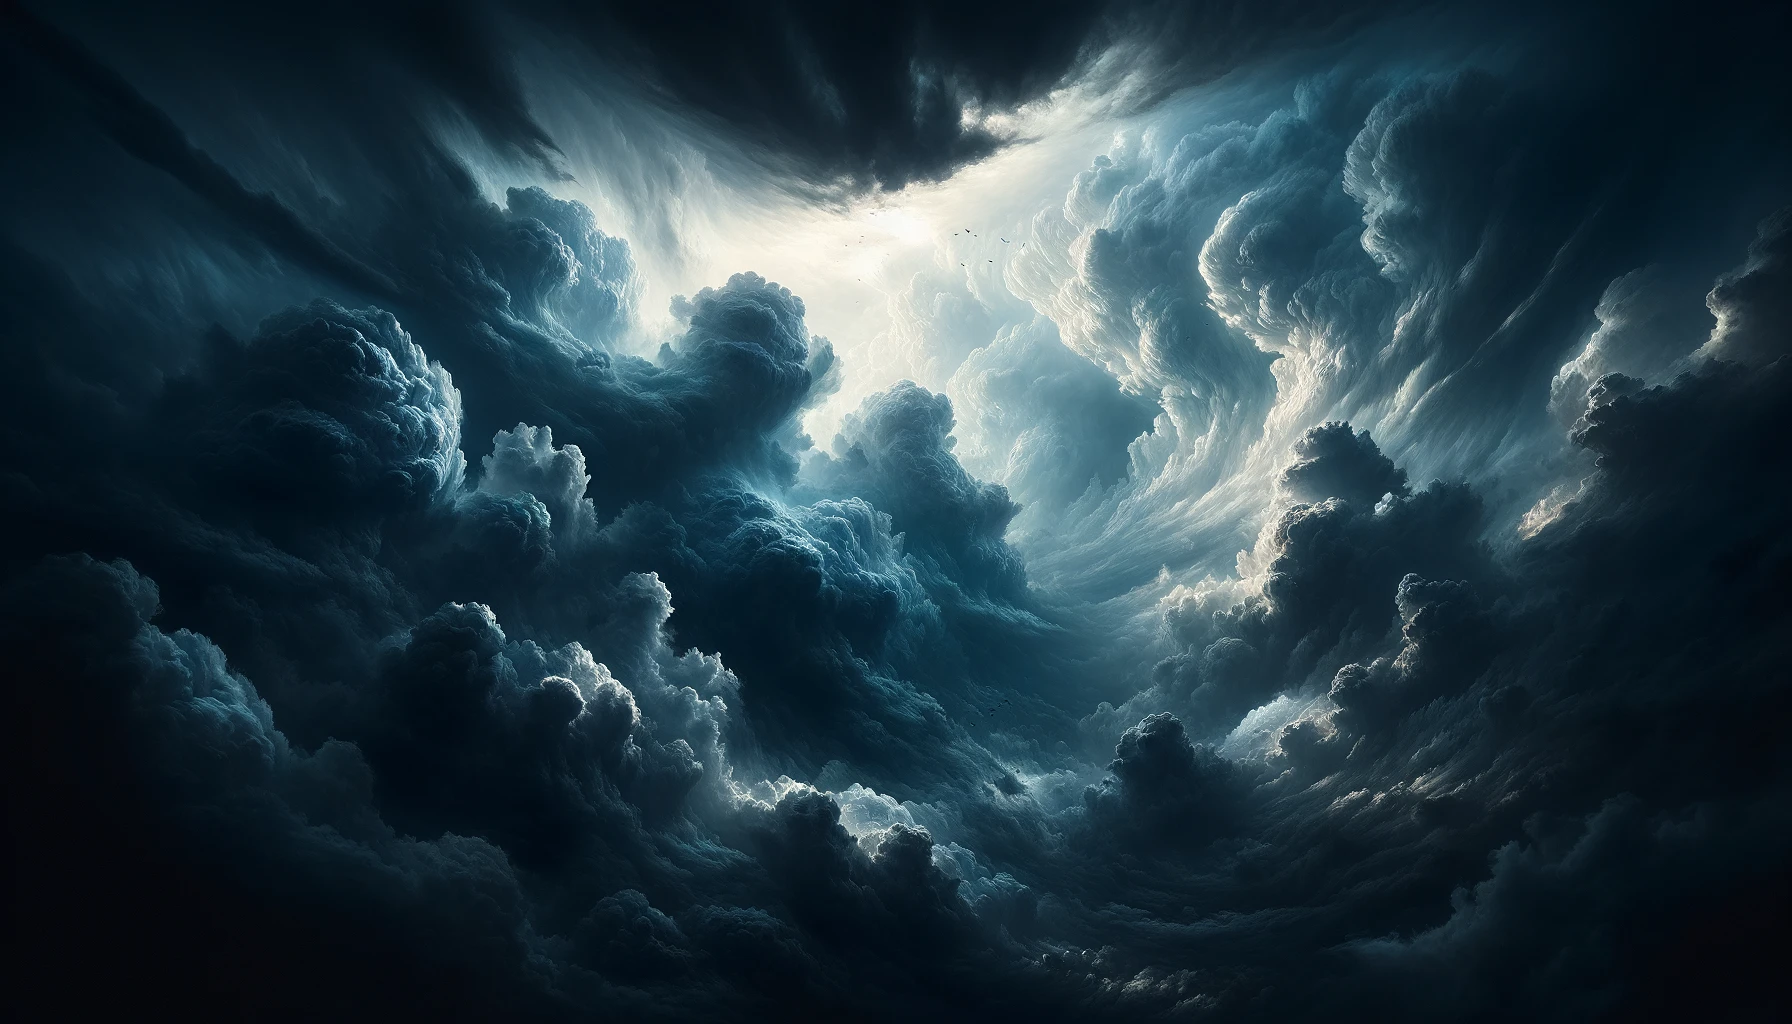 Dall·e 2024 03 09 13.00.56 Create An Image Of A Dramatic Sky Filled With Heavy, Voluminous Clouds, Shades Of Dark Blue And Grey Dominating The Palette. The Clouds Are Dense And